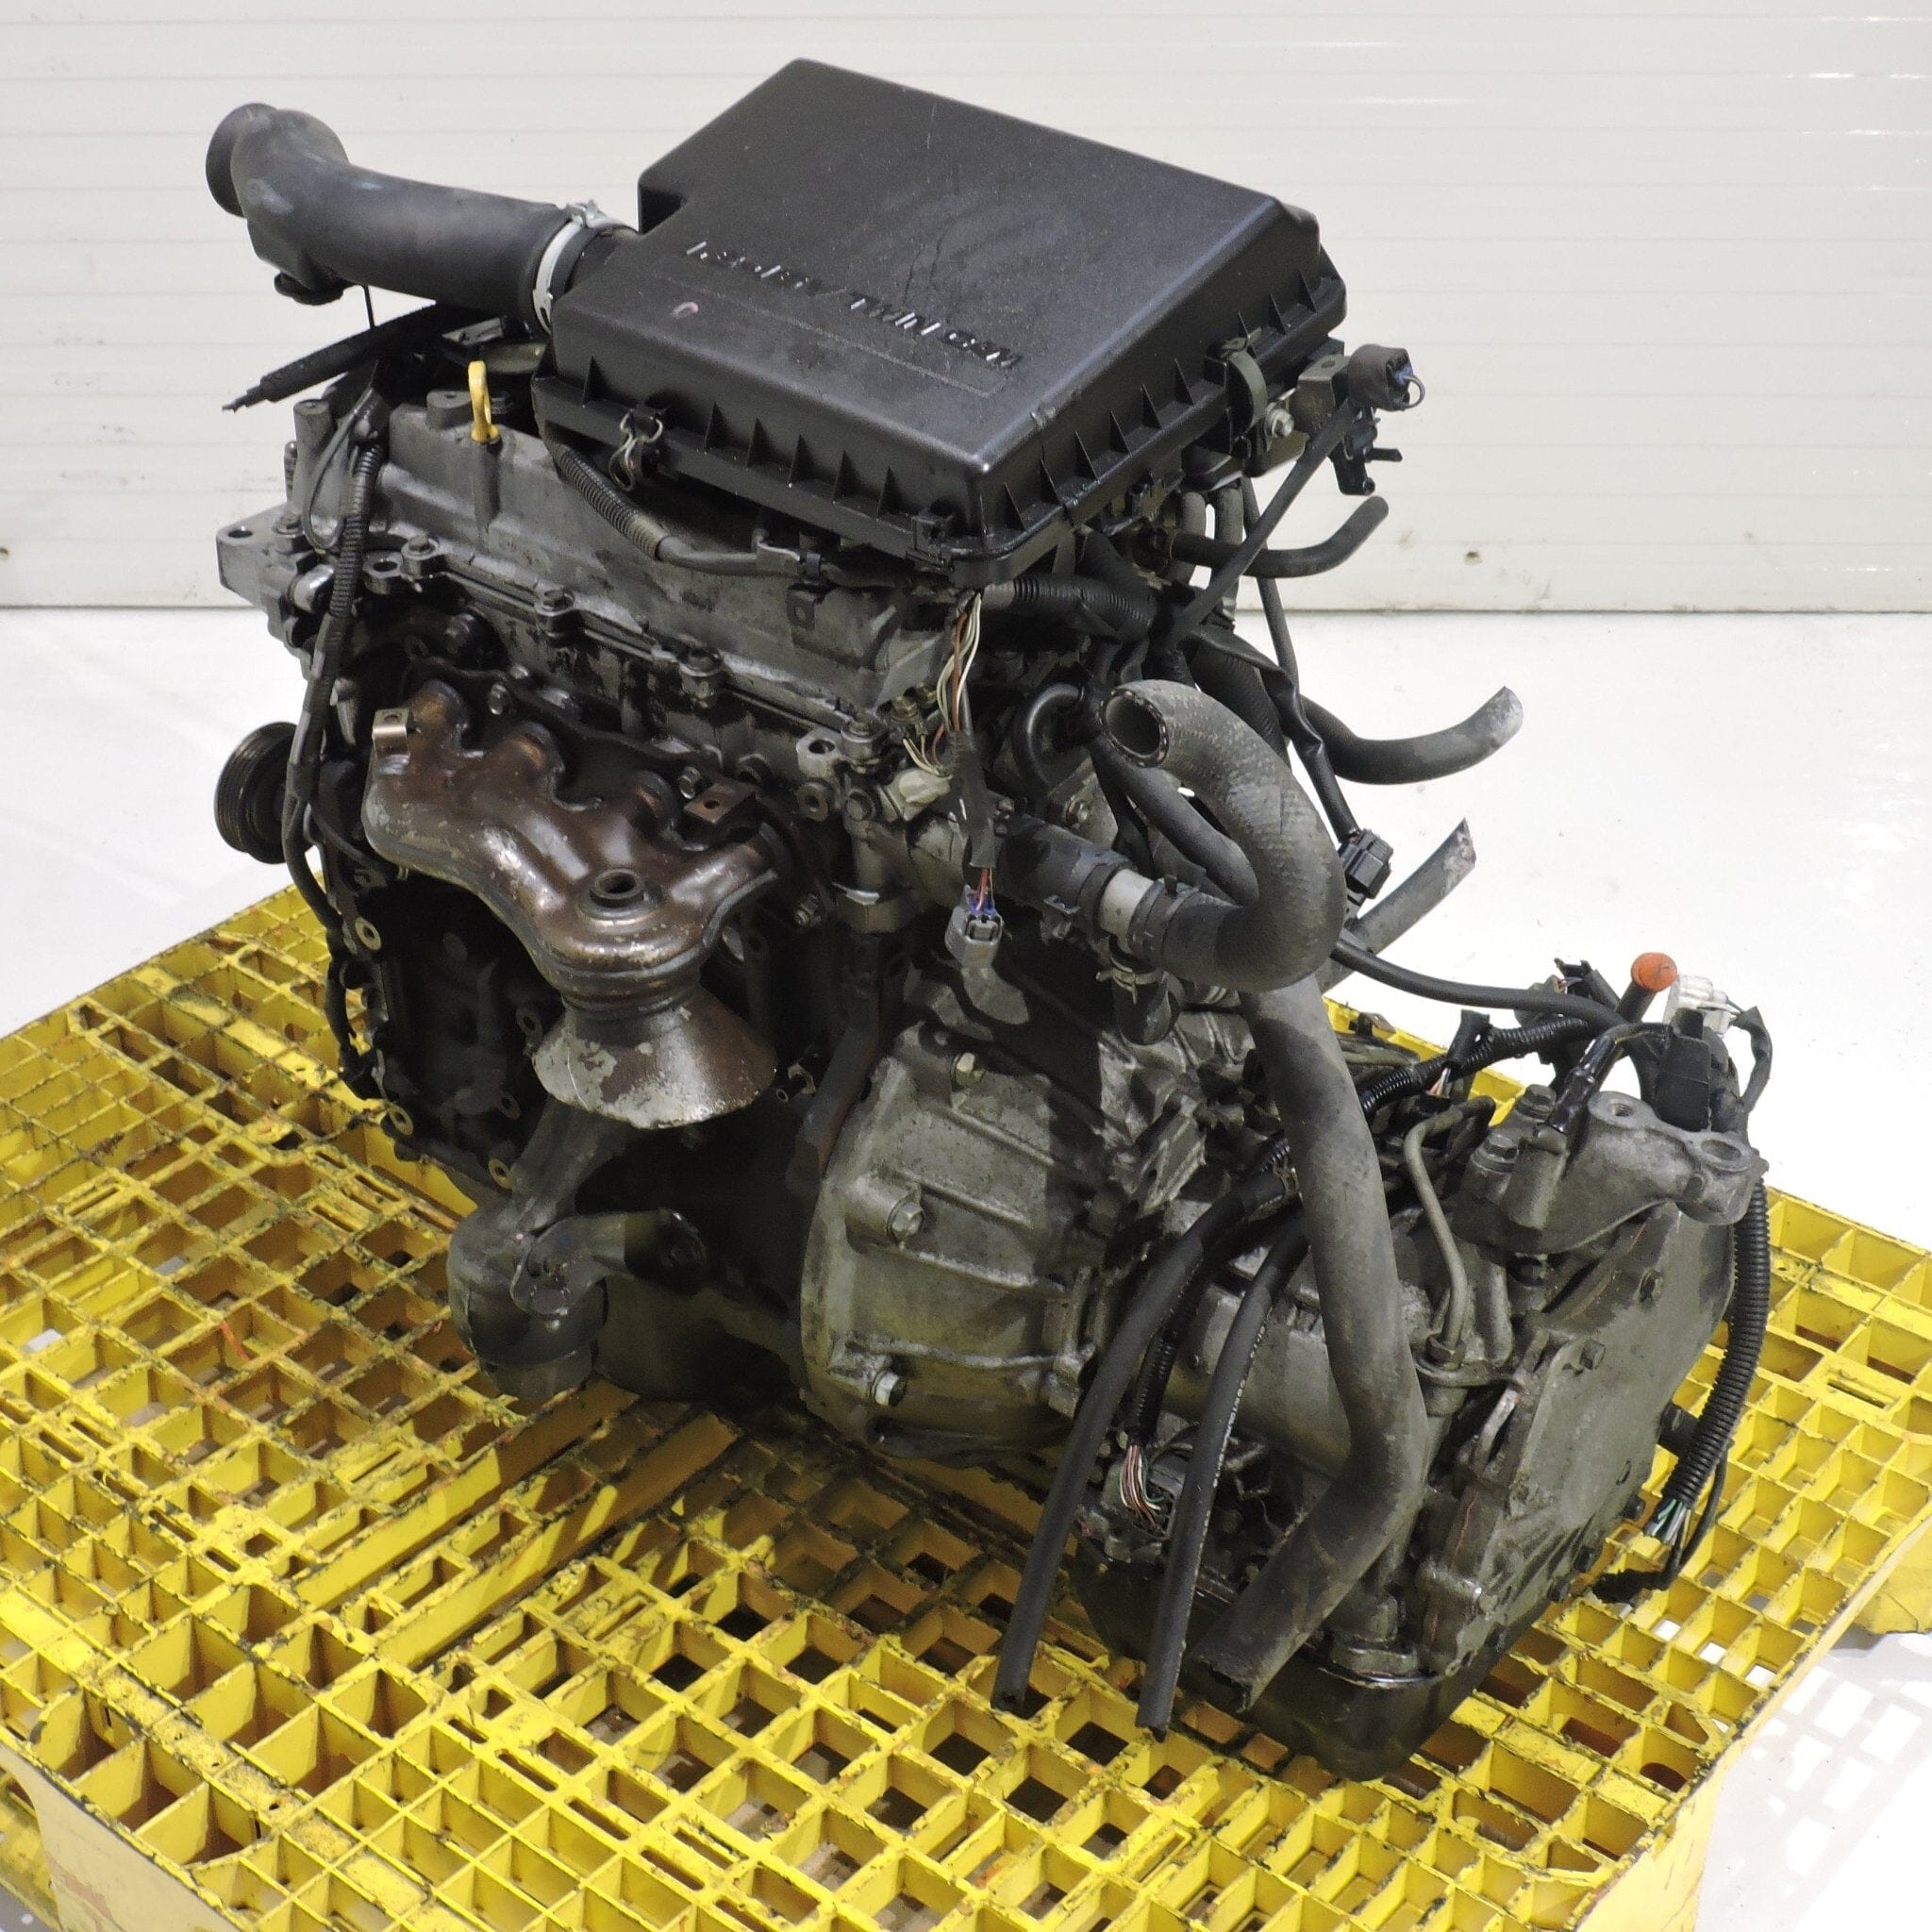 Toyota Echo 1999-2005 1.3L JDM Fwd Automatic Replacement Engine Swap- K3-VE